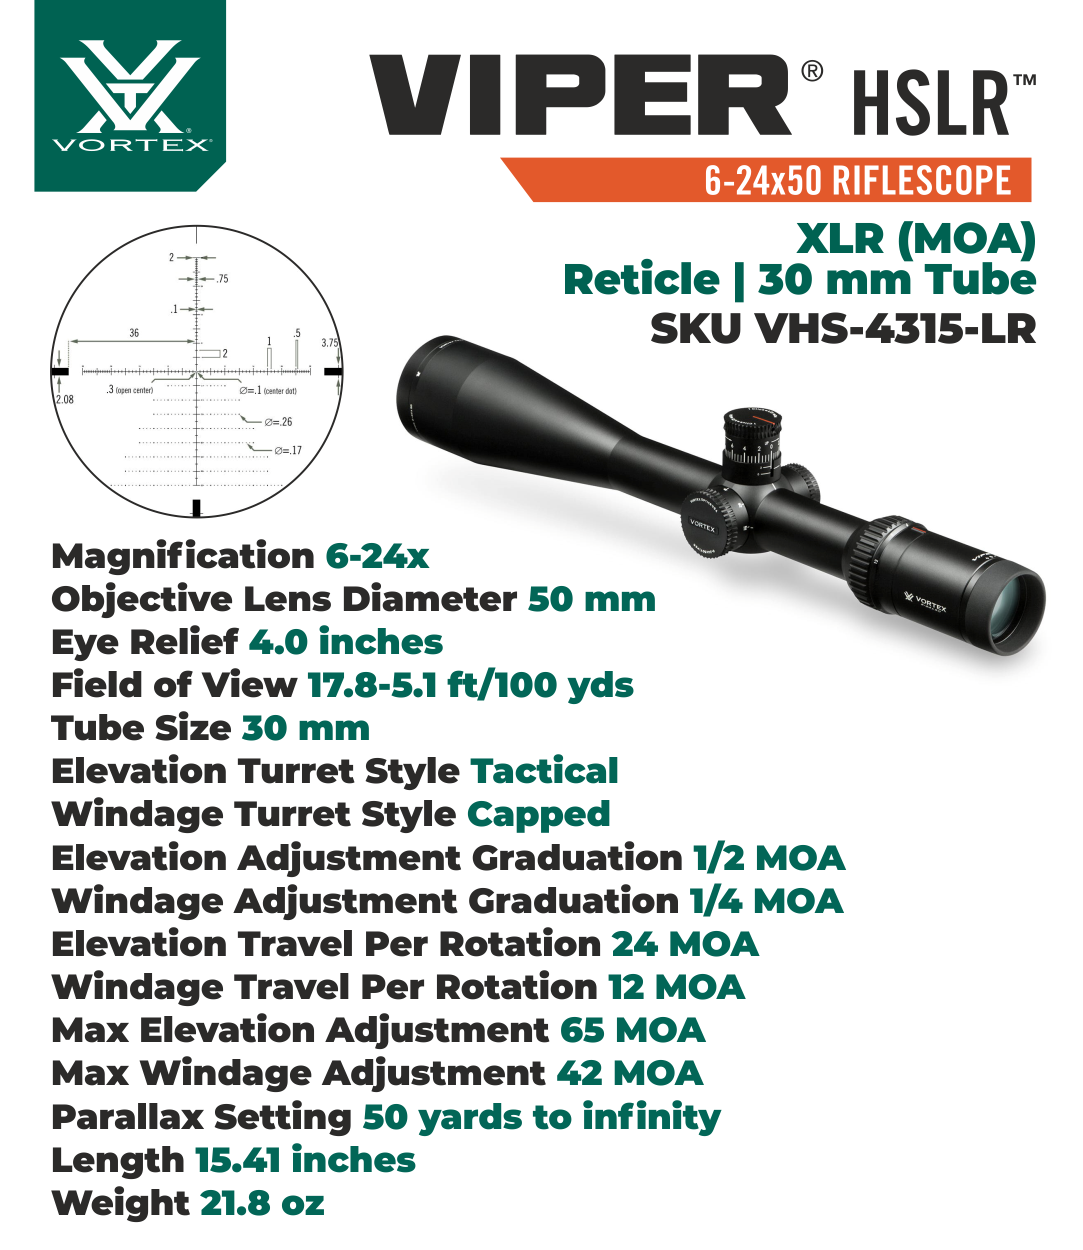 Vortex Optics Viper HSLR 6-24X50 XLR (MOA) FFP, 30 mm Tube with Pro 30mm High Rings (1.18in) and Free Hat Bundle - image 2 of 7